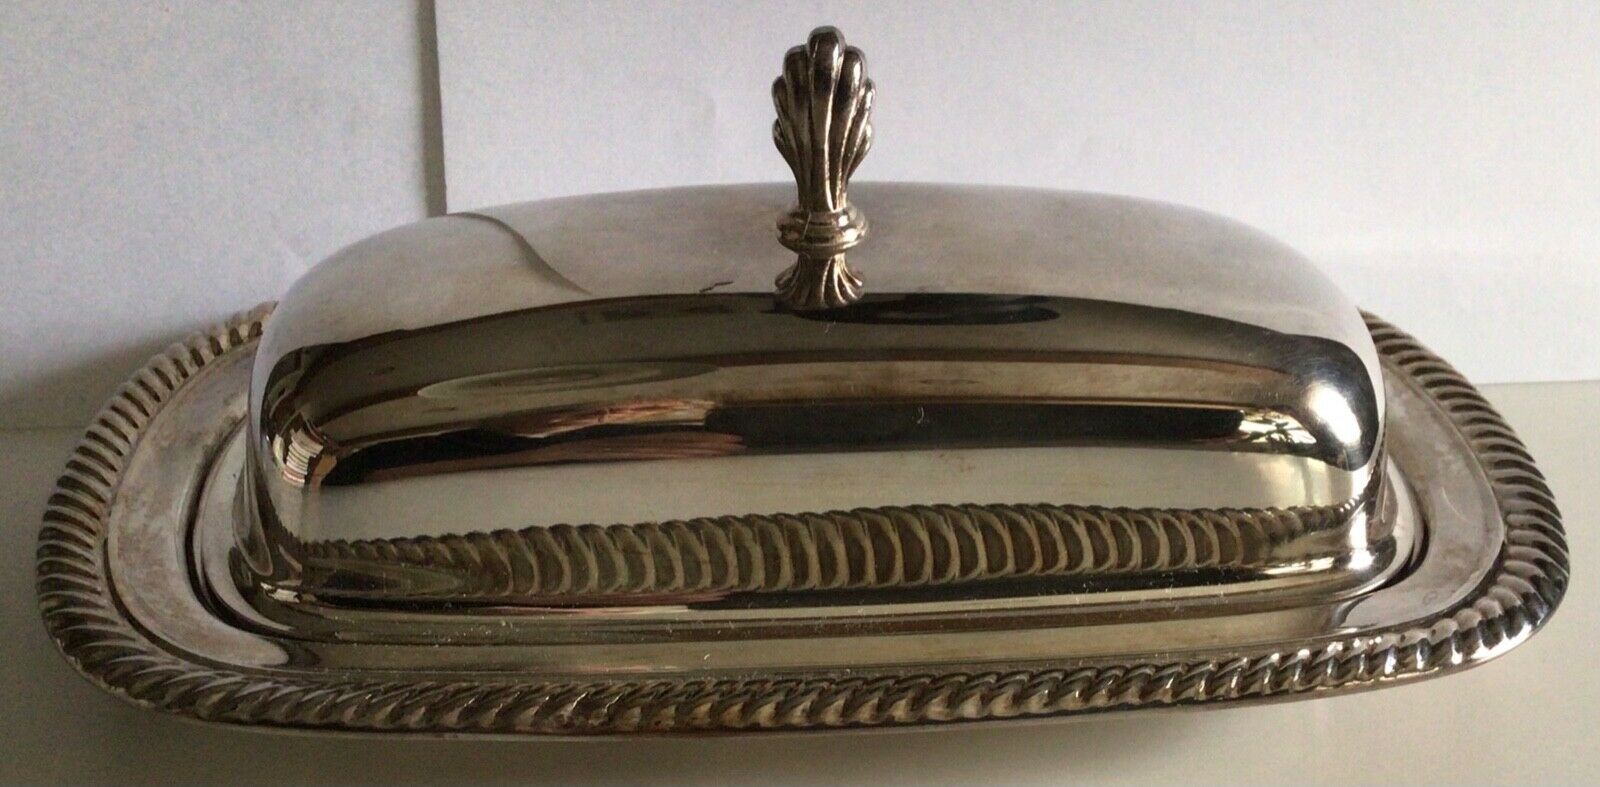 Wm Rogers Butter Dish, 887, Silverplate With Glass Insert